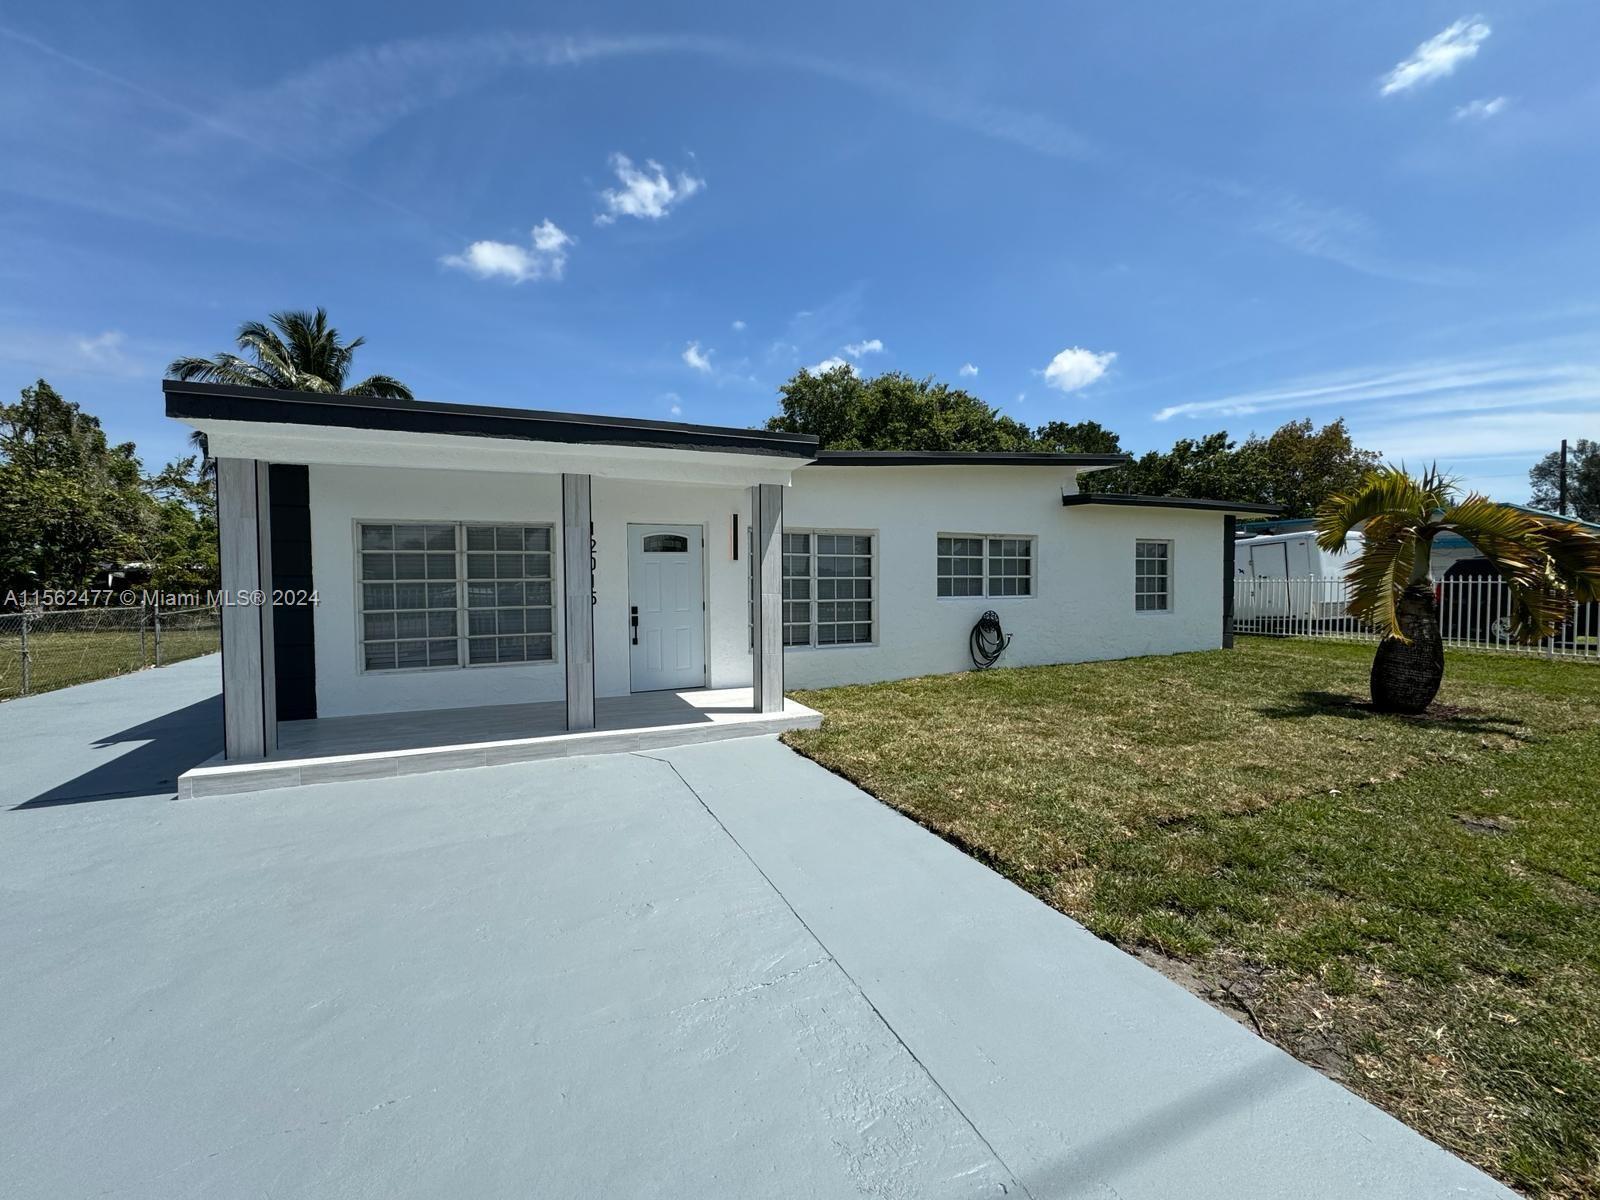 Photo of 12015 NW 22nd Ave in Miami, FL